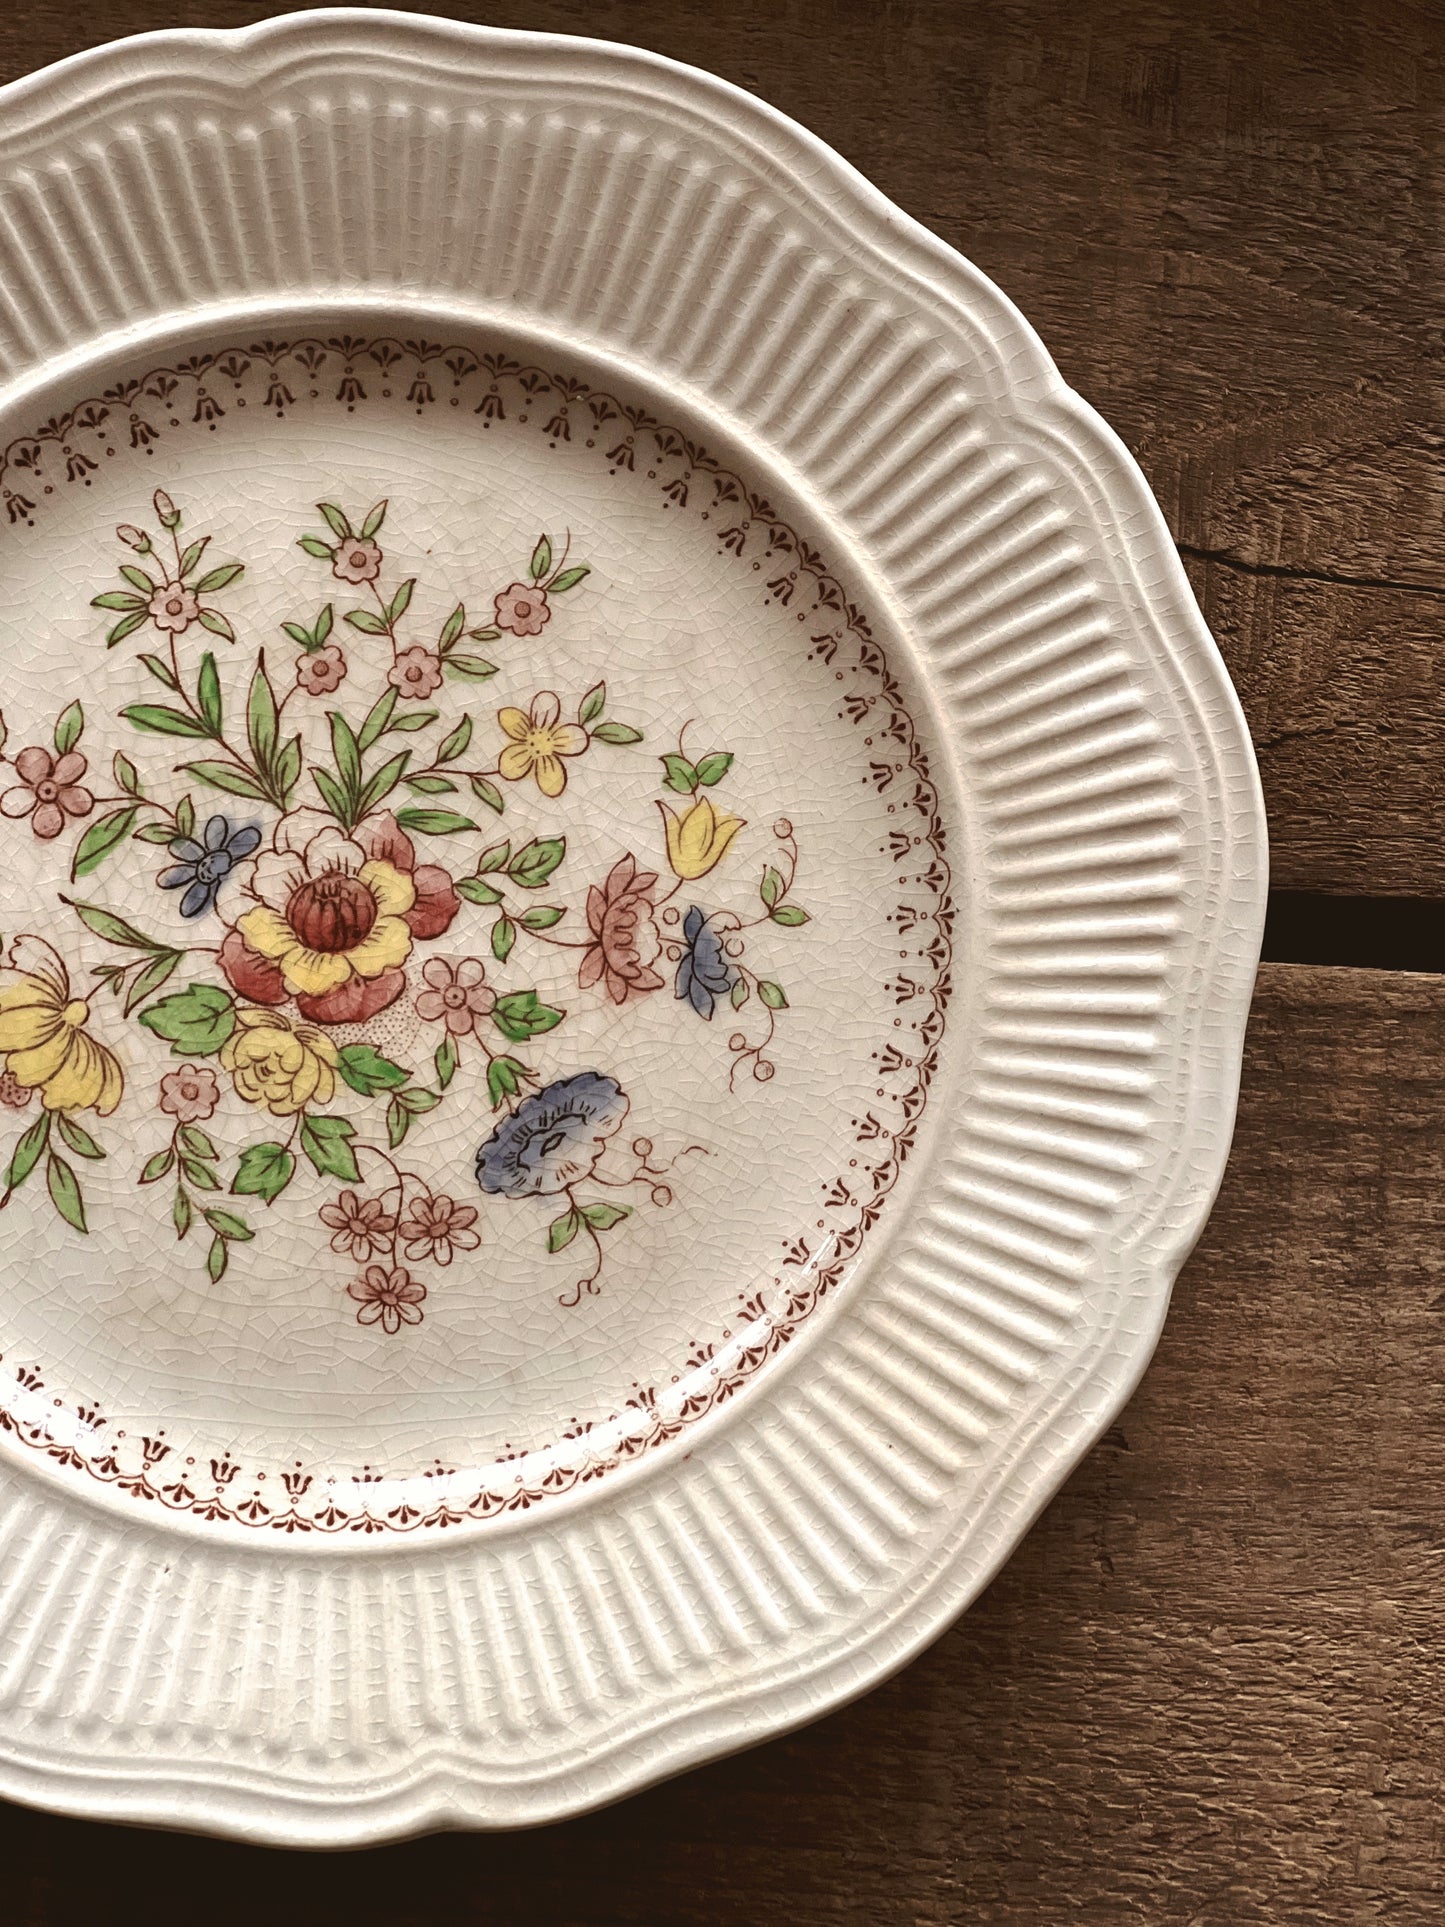 Vintage Royal Doulton The Medford Bread & Butter Plate